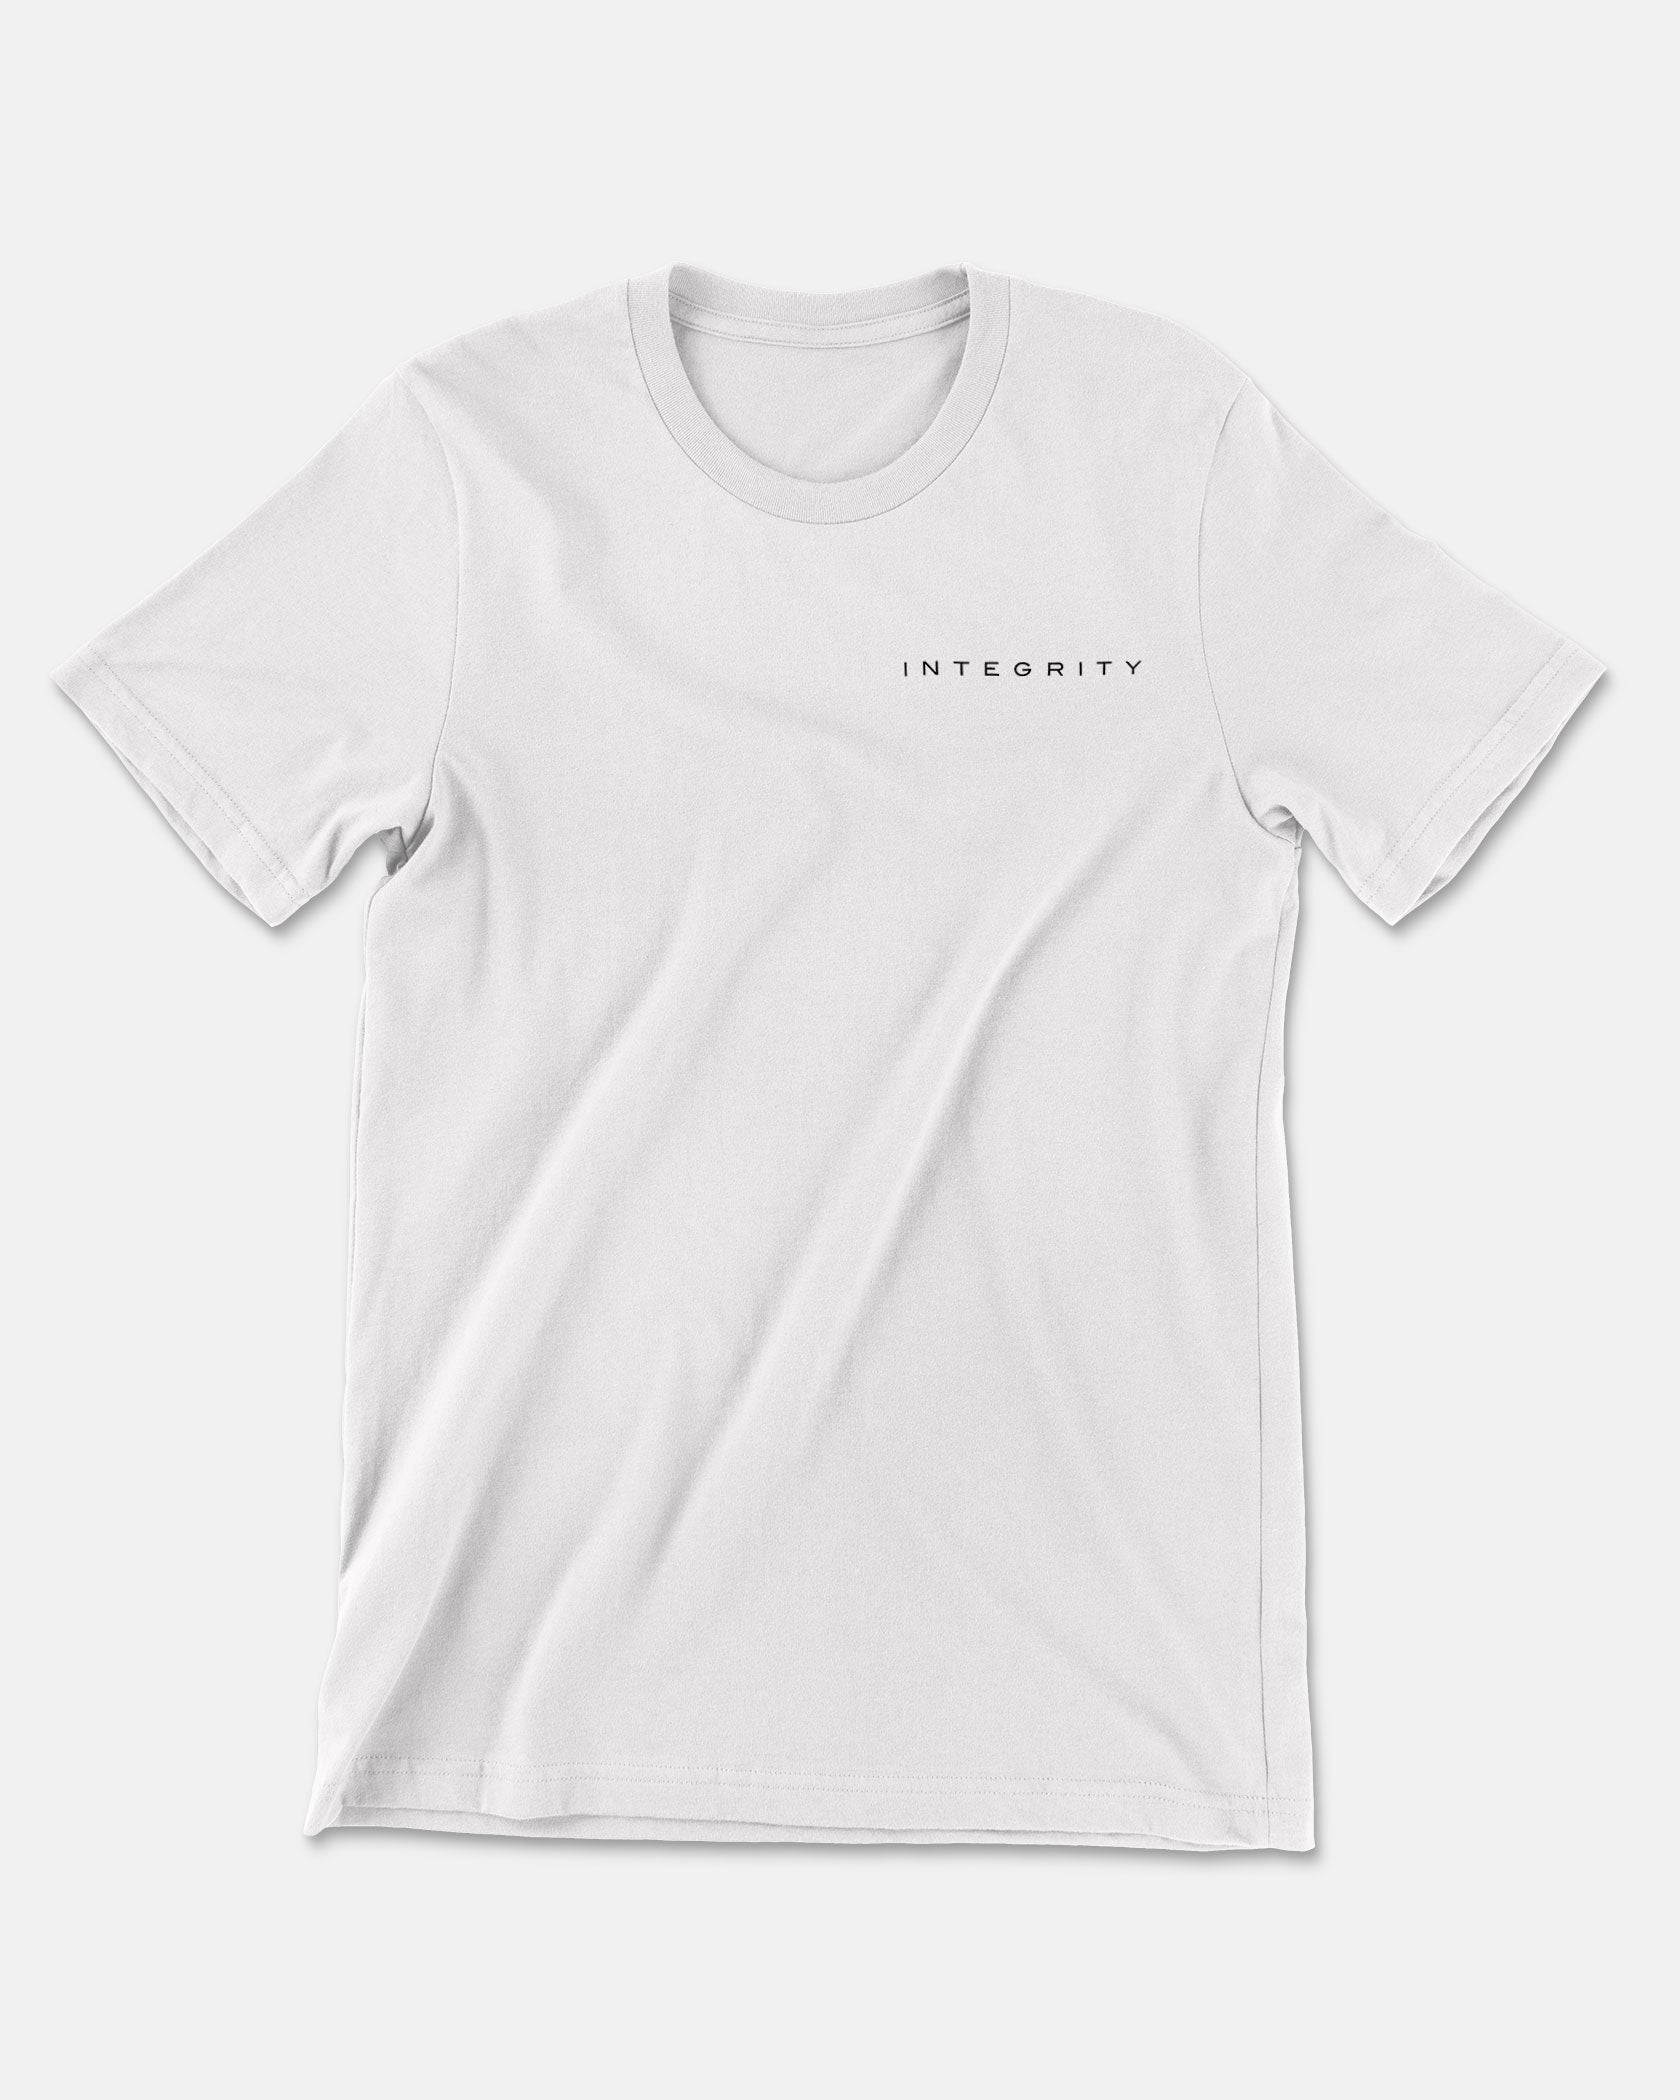 Integrity by Trevor Ailey Shirt 002